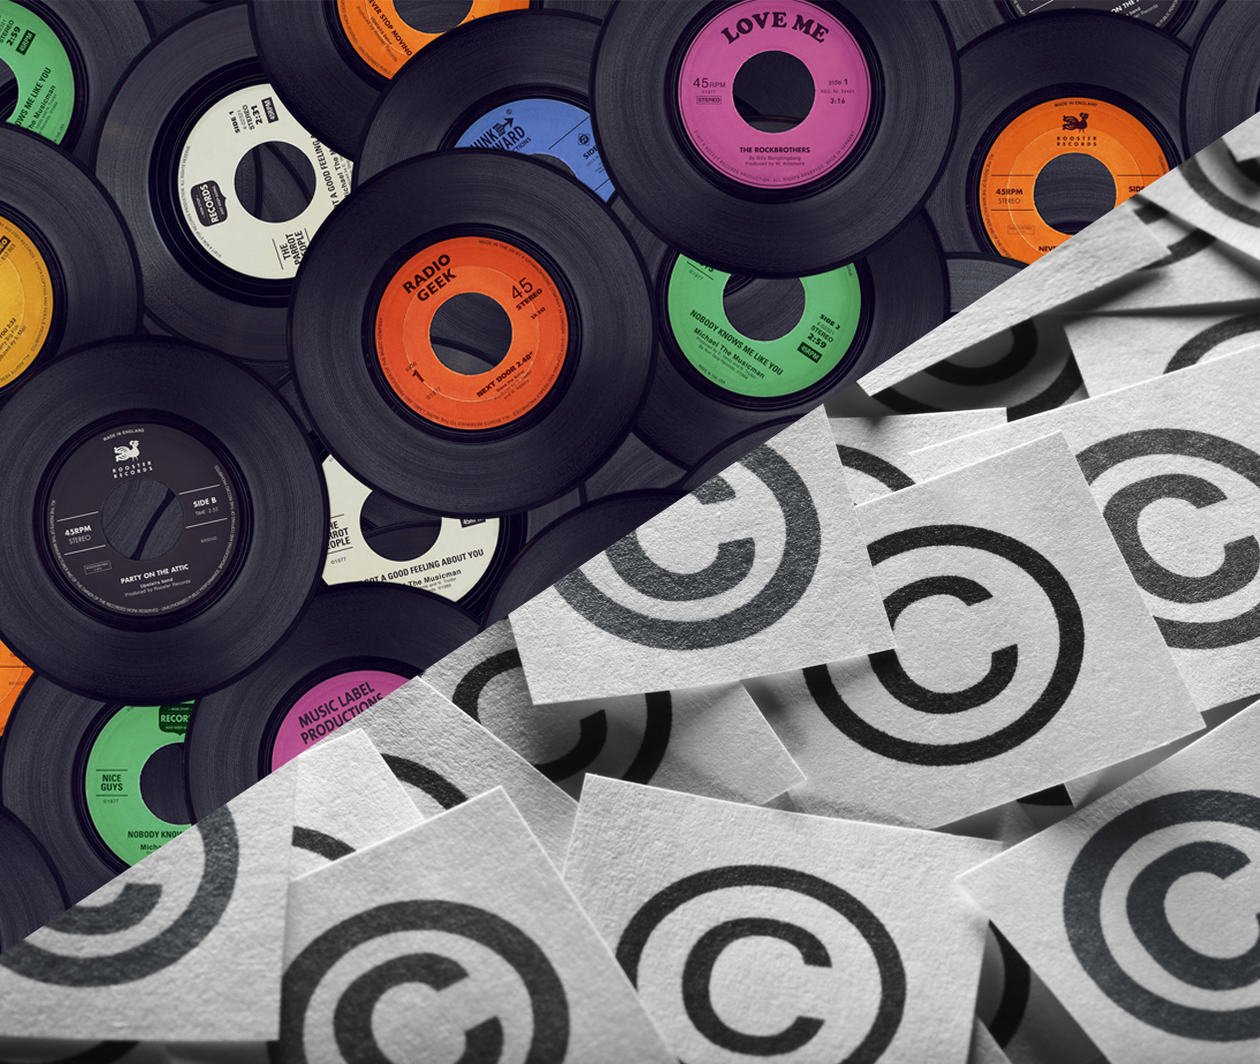 How to Copyright Music